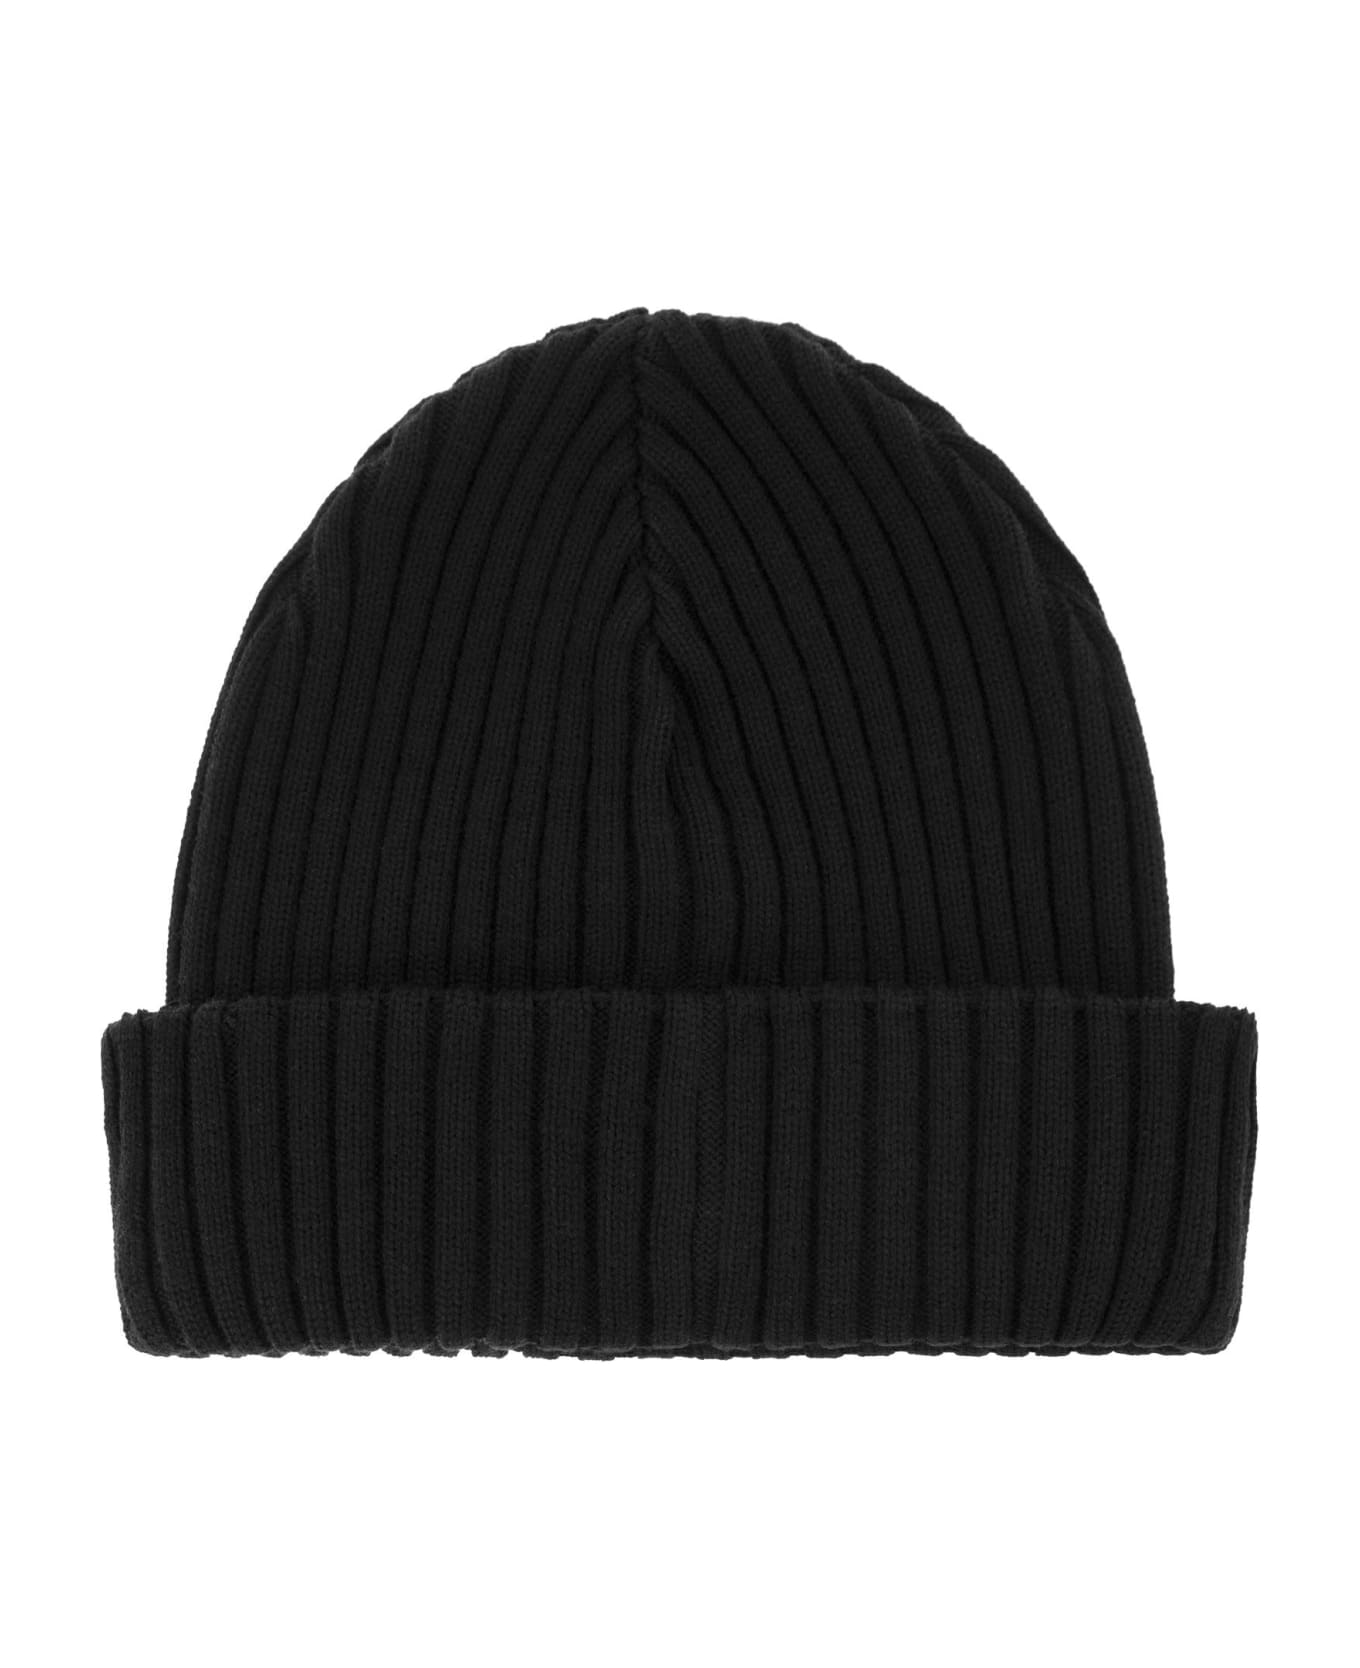 Paul&Shark Iconic Coin Badge Ribbed Wool Hat - Black